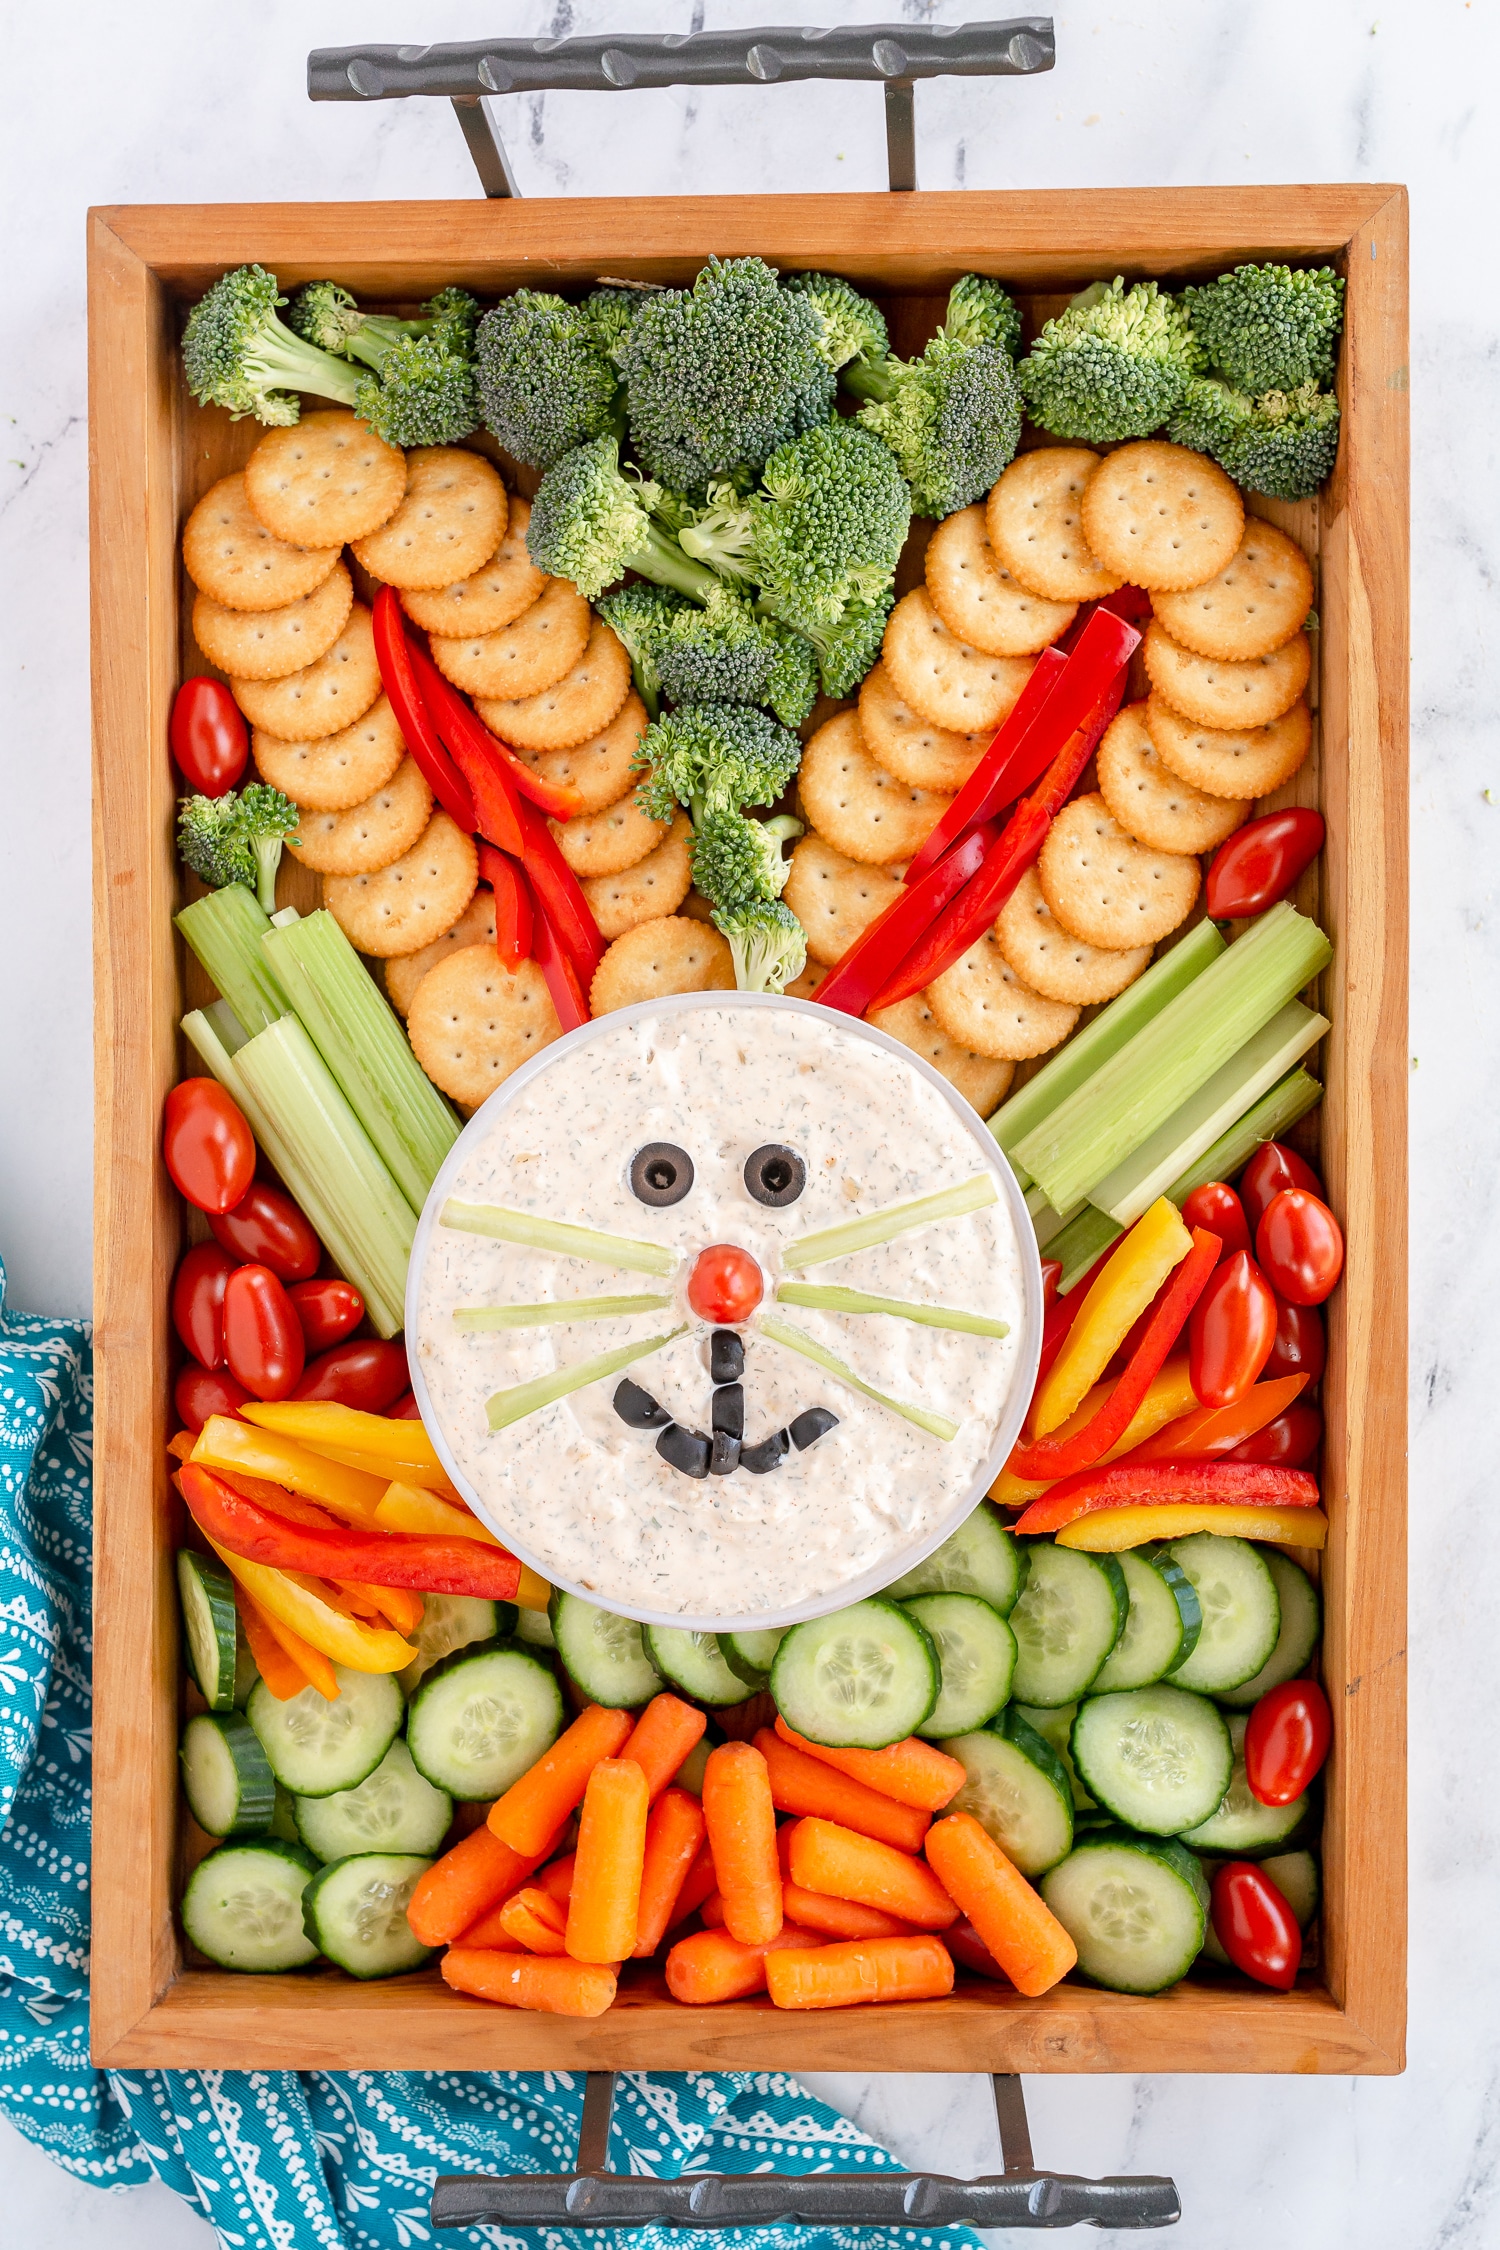 Easter Bunny Veggie Tray - veggies on board shaped as Bunny